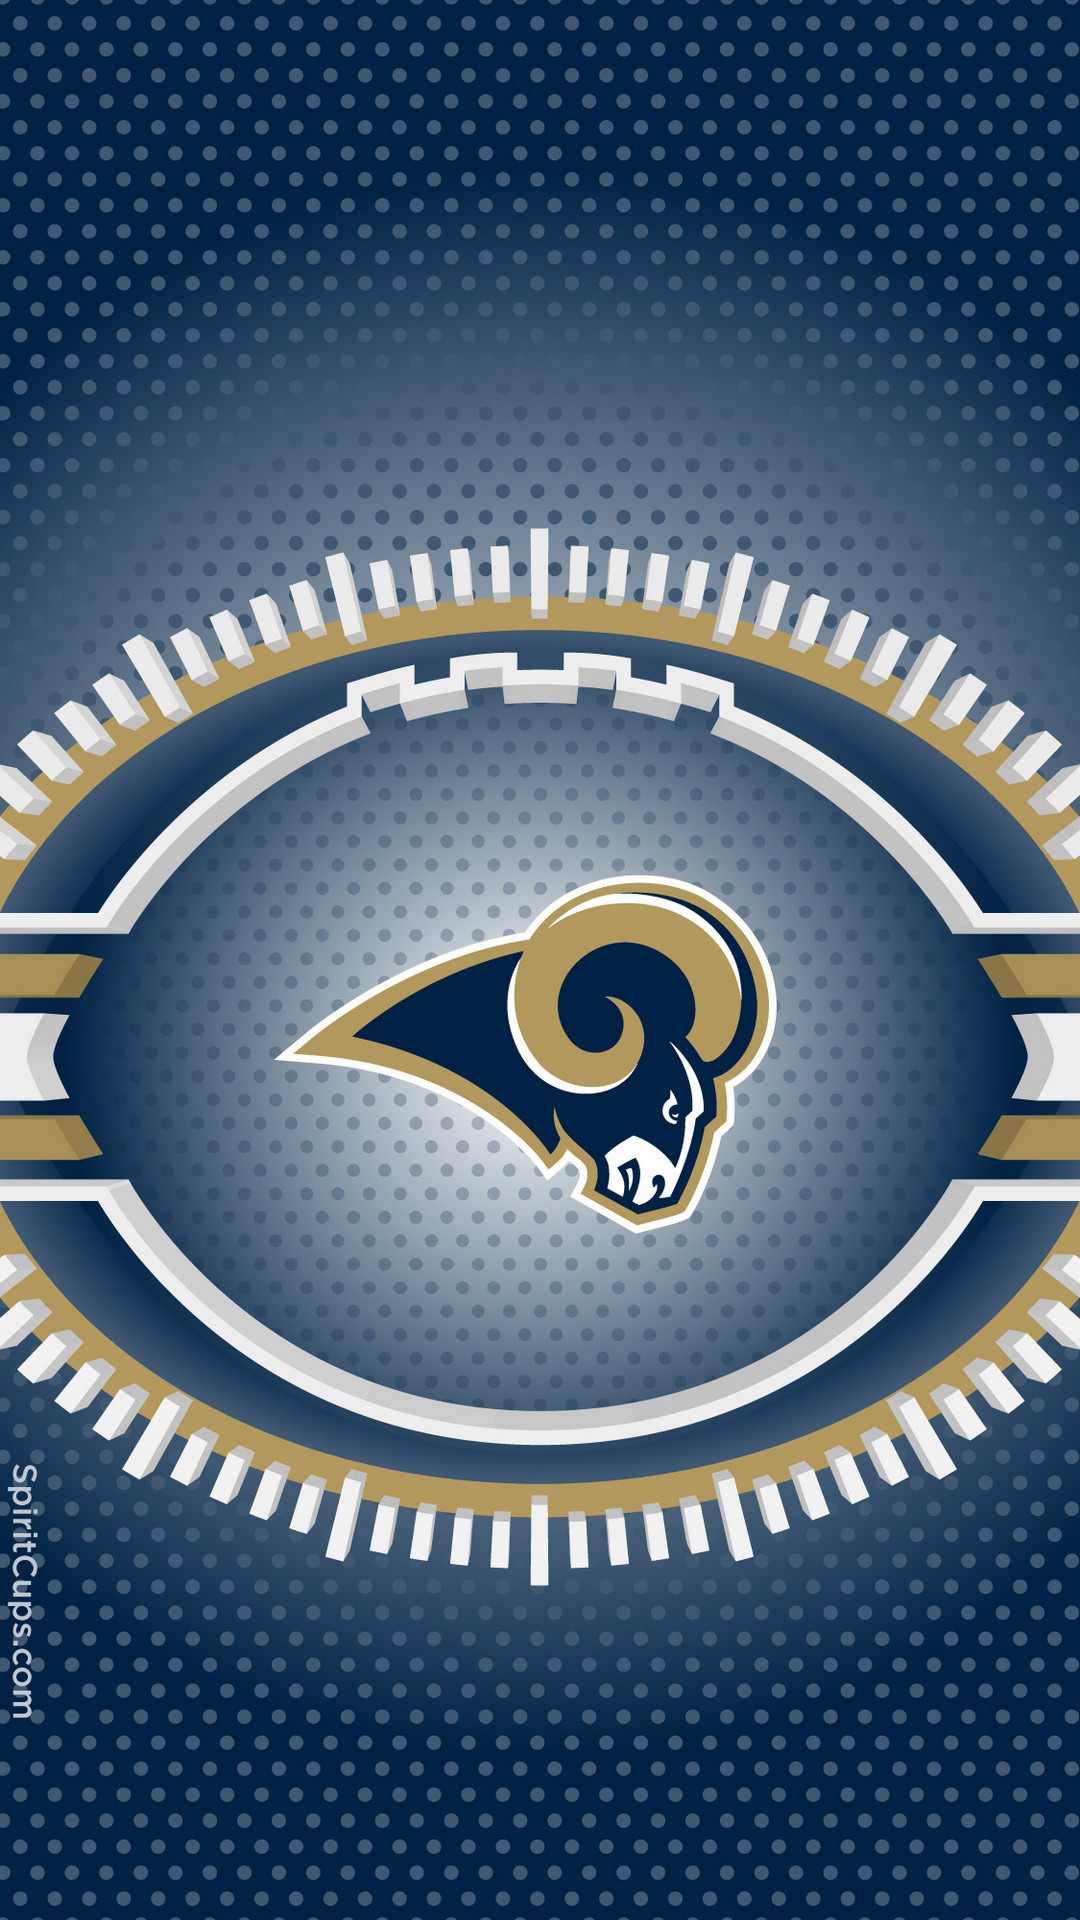 Los Angeles Rams iPhone 8 Wallpaper with high-resolution 1080x1920 pixel. Download and set as wallpaper for Desktop Computer, Apple iPhone X, XS Max, XR, 8, 7, 6, SE, iPad, Android